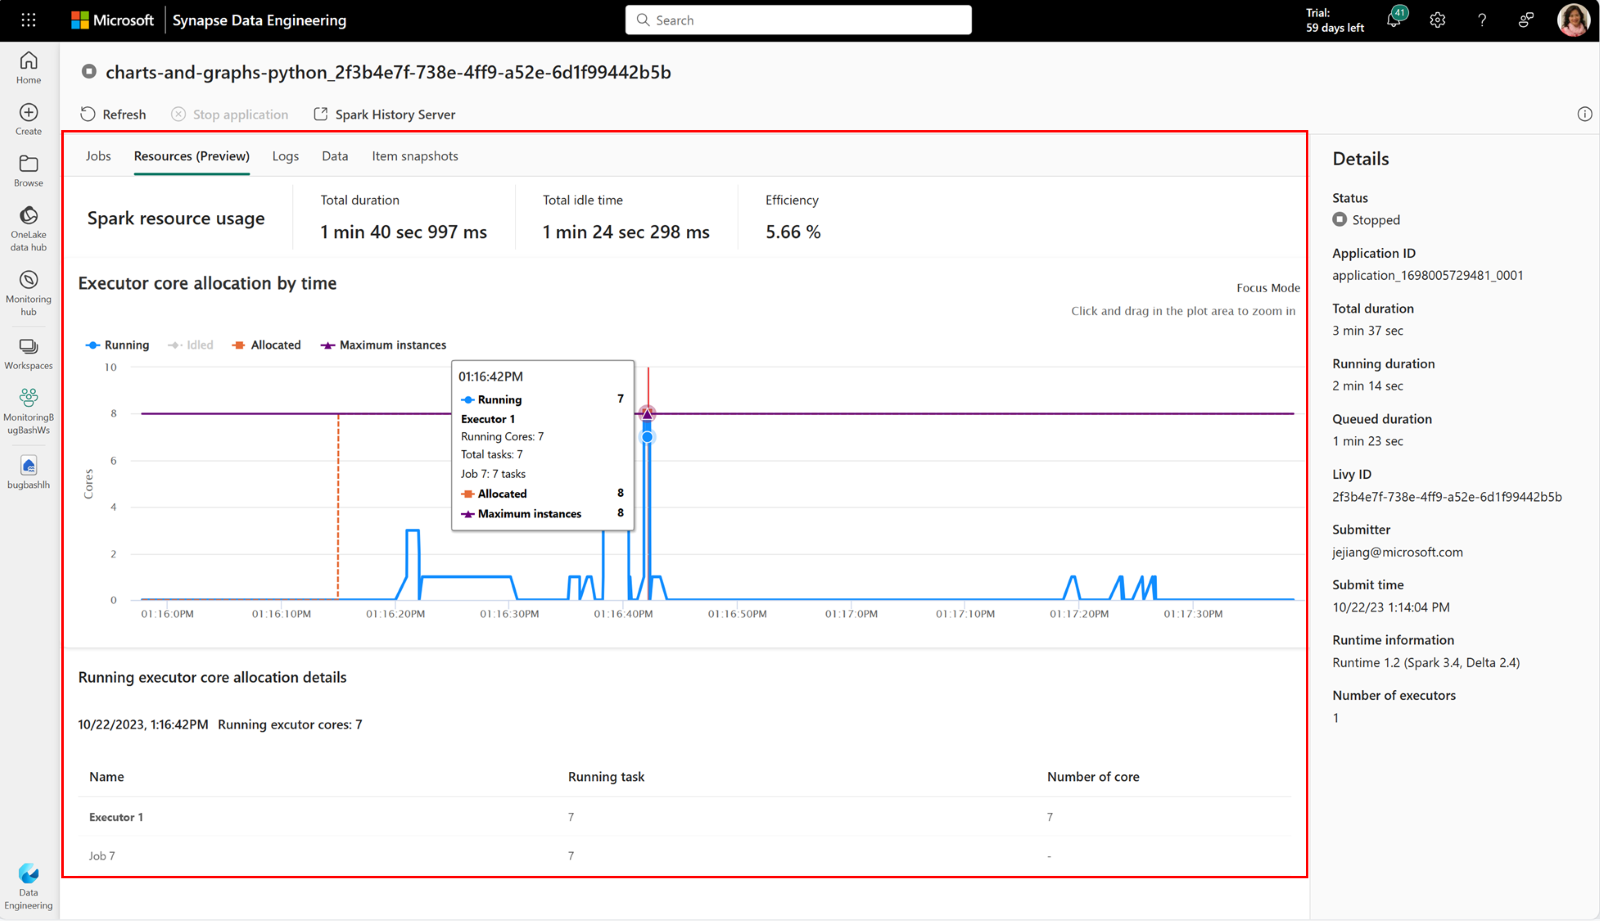 sql server reporting services to power bi